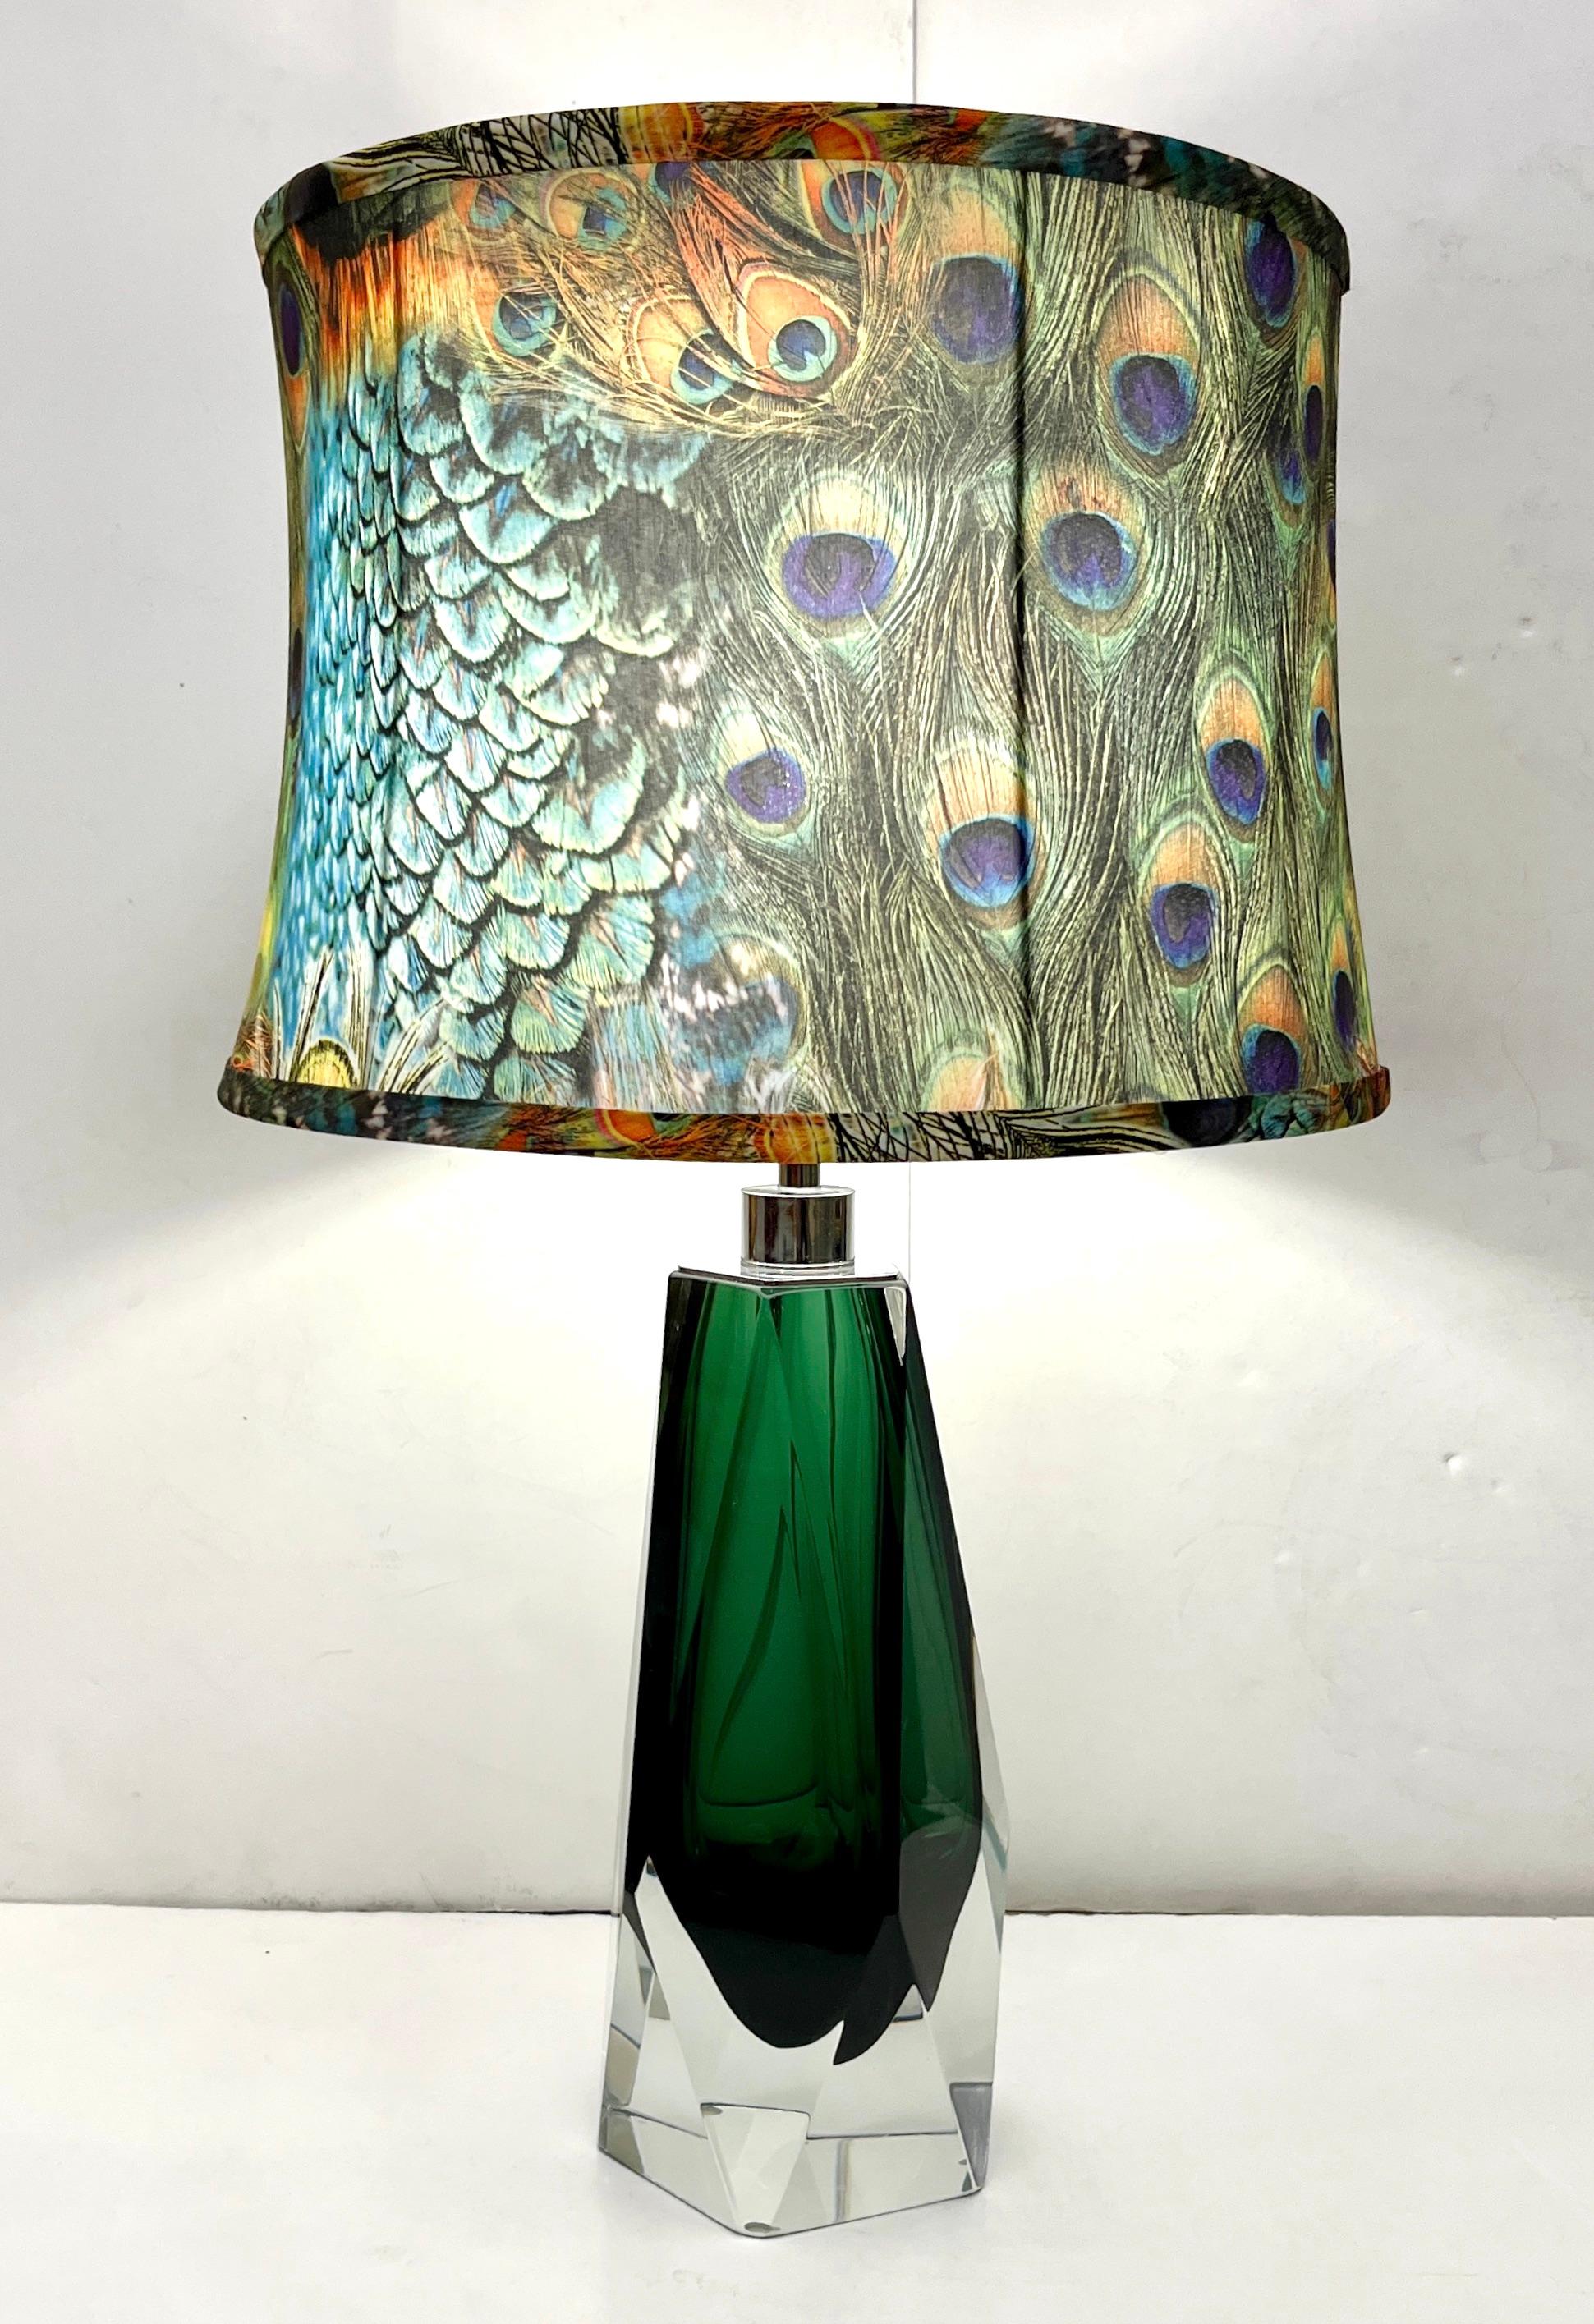 Contemporary Italian Pair of Murano Glass Lamps, work of Art signed by Alberto Donà, entirely blown and handcrafted, the glass body is diamond cut and worked in Sommerso with a deep green color enveloped and overlaid in crystal clear Murano glass.